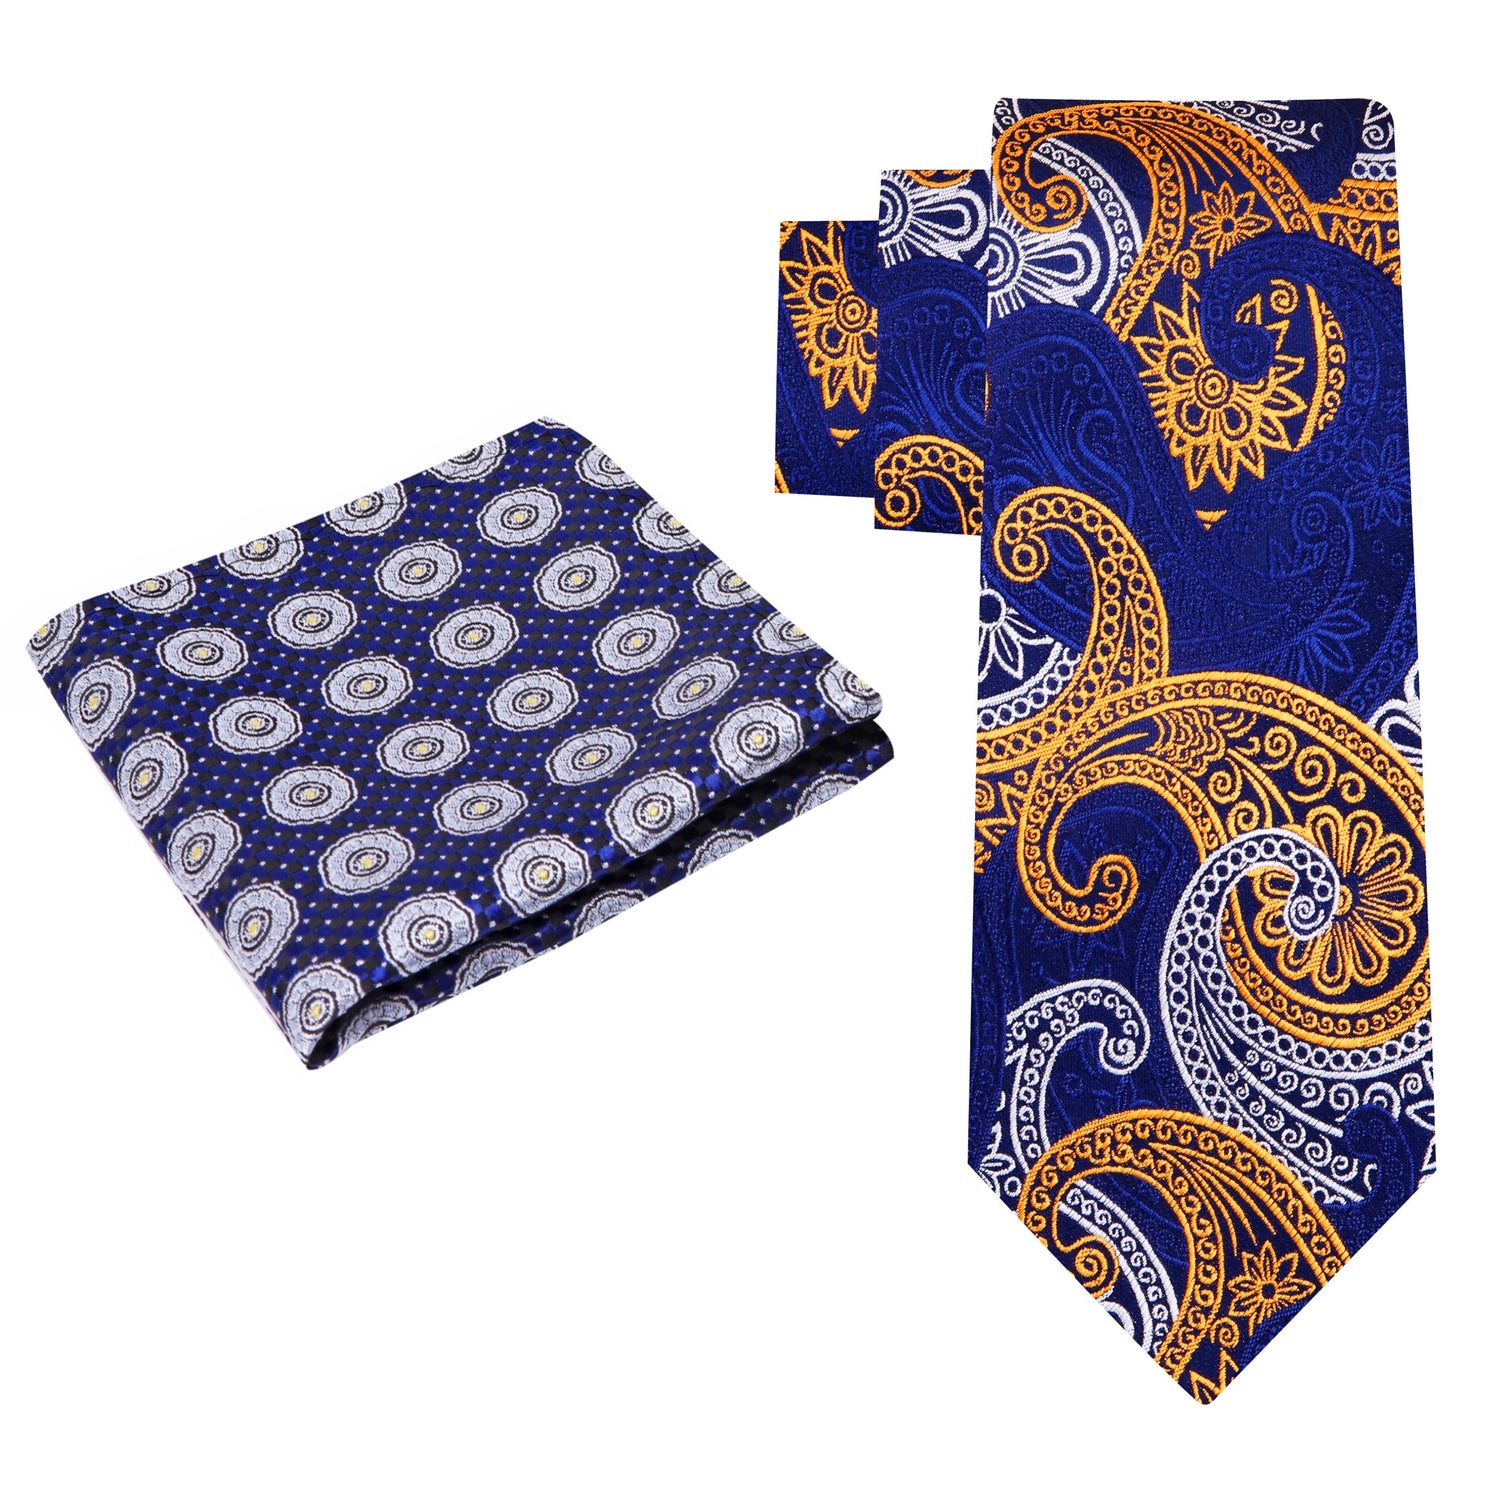 Alt View: Blue, Yellow Gold, White Paisley Tie and Accenting Blue Grey Yellow Geometric Square